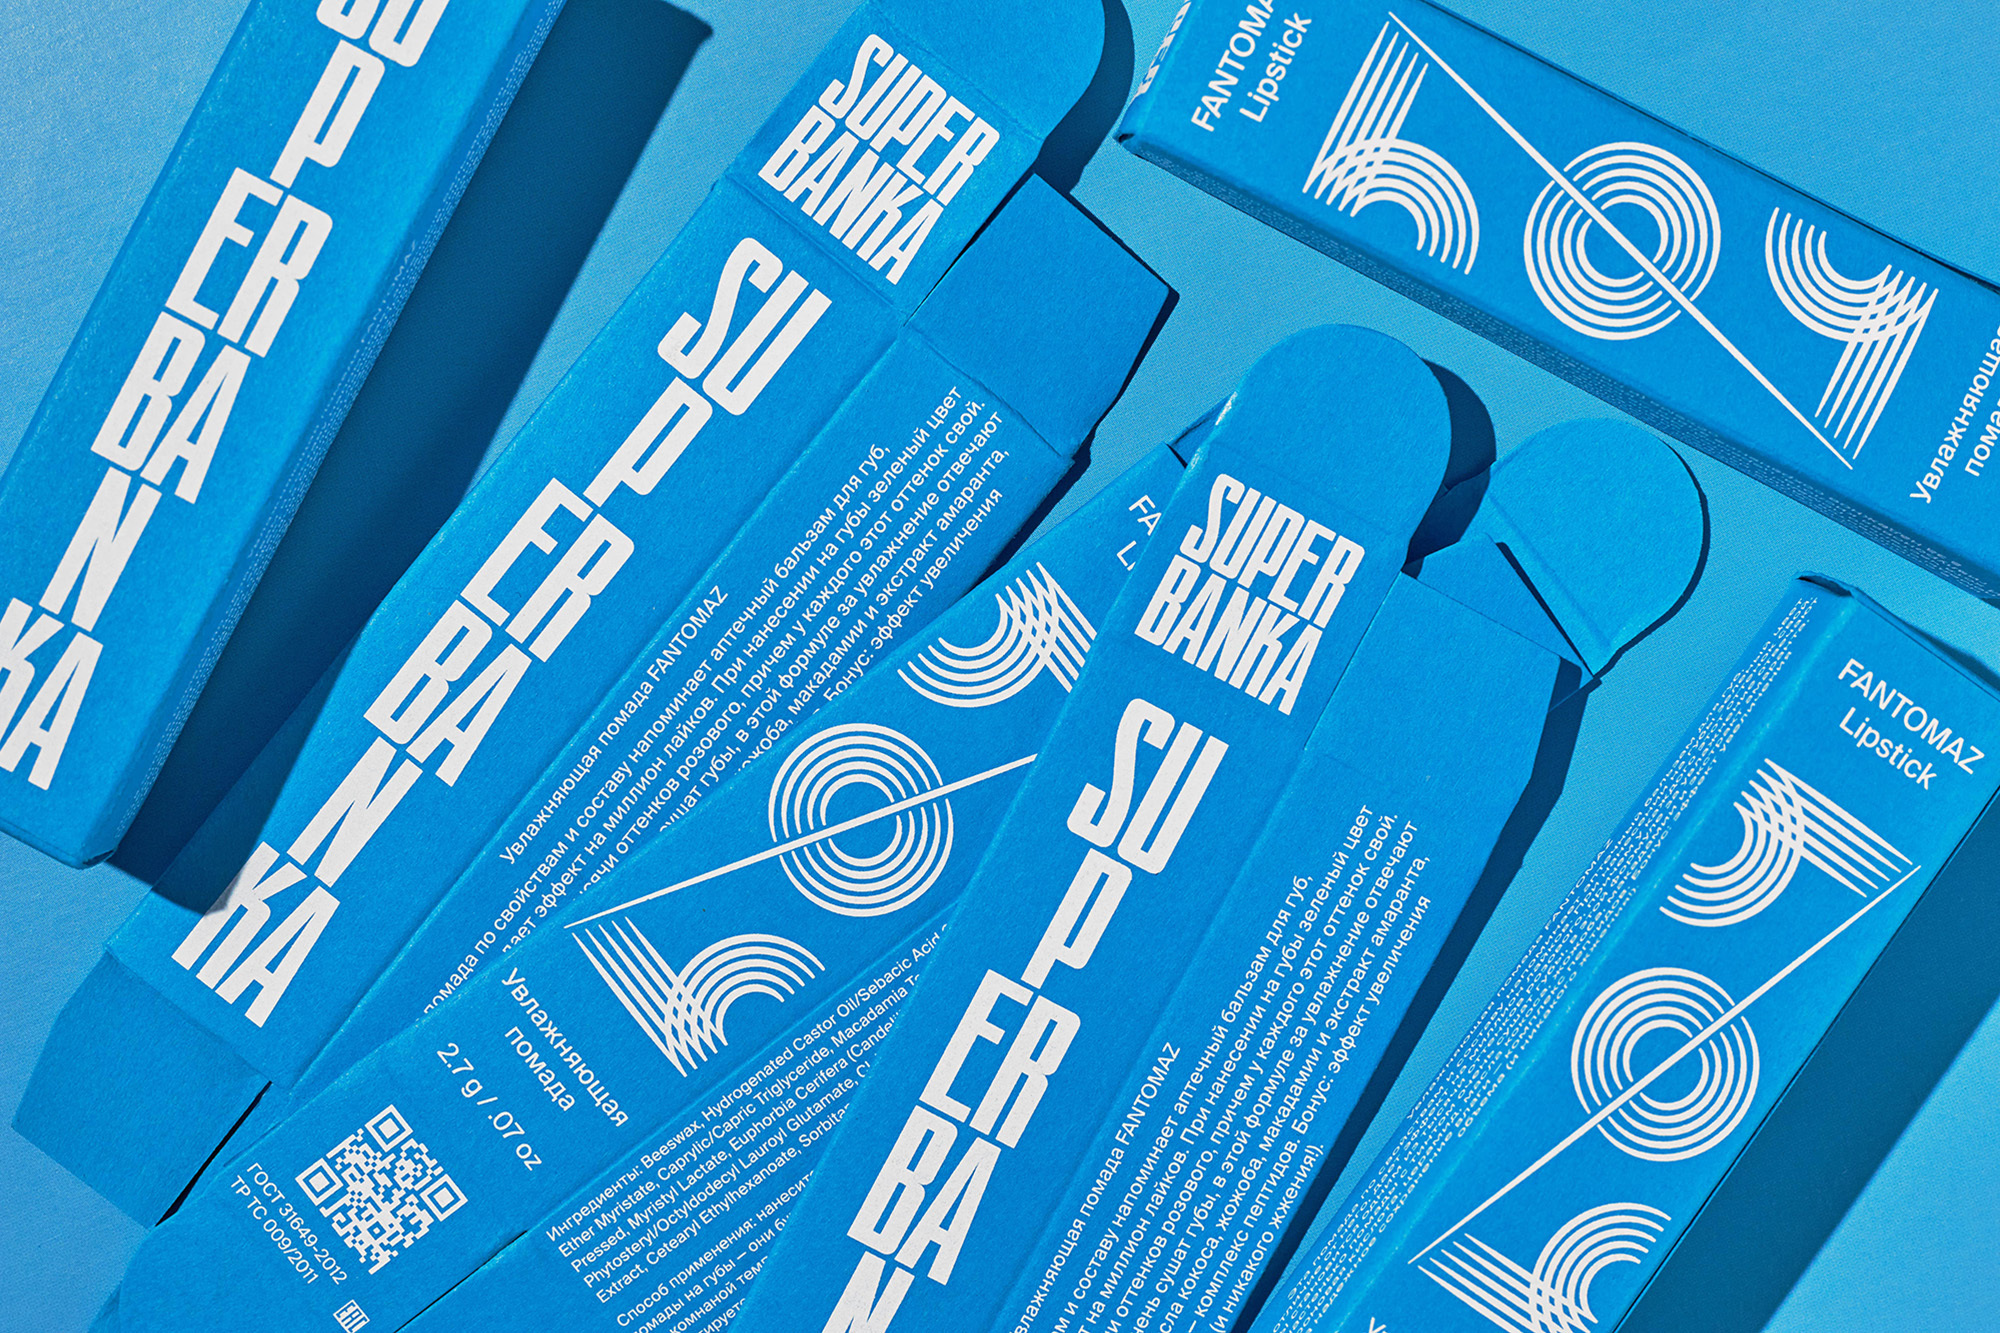 Moscow Mule's vibrant identity for skincare brand Superbanka is